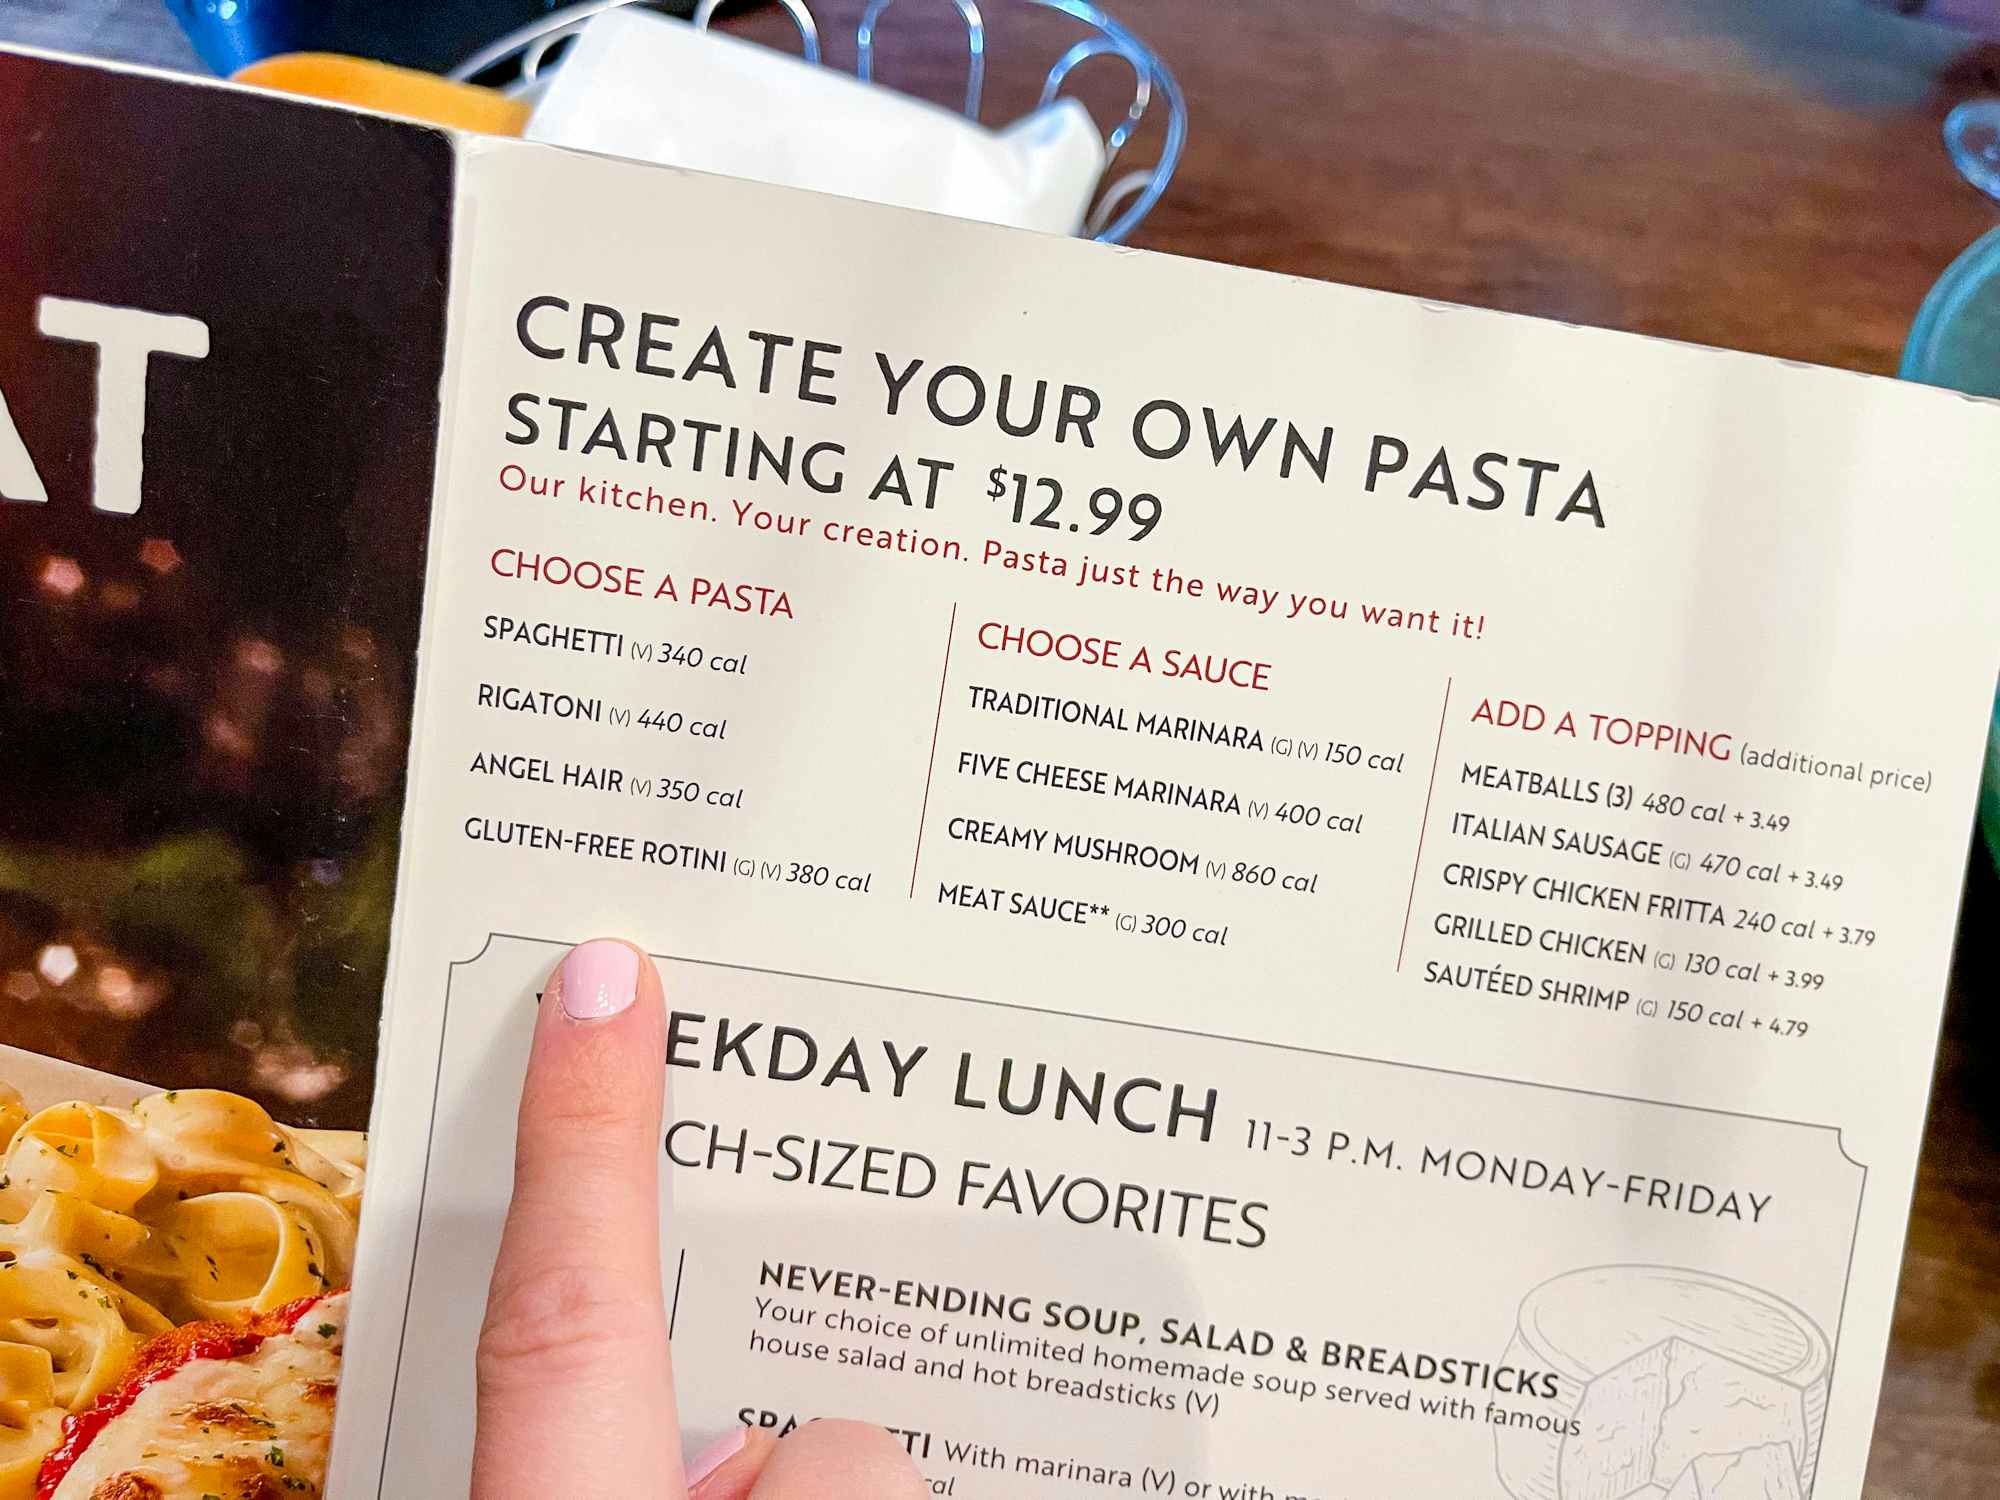 Someone pointing to the Gluten Free option on the Create Your Own Pasta section of the Olive Garden menu